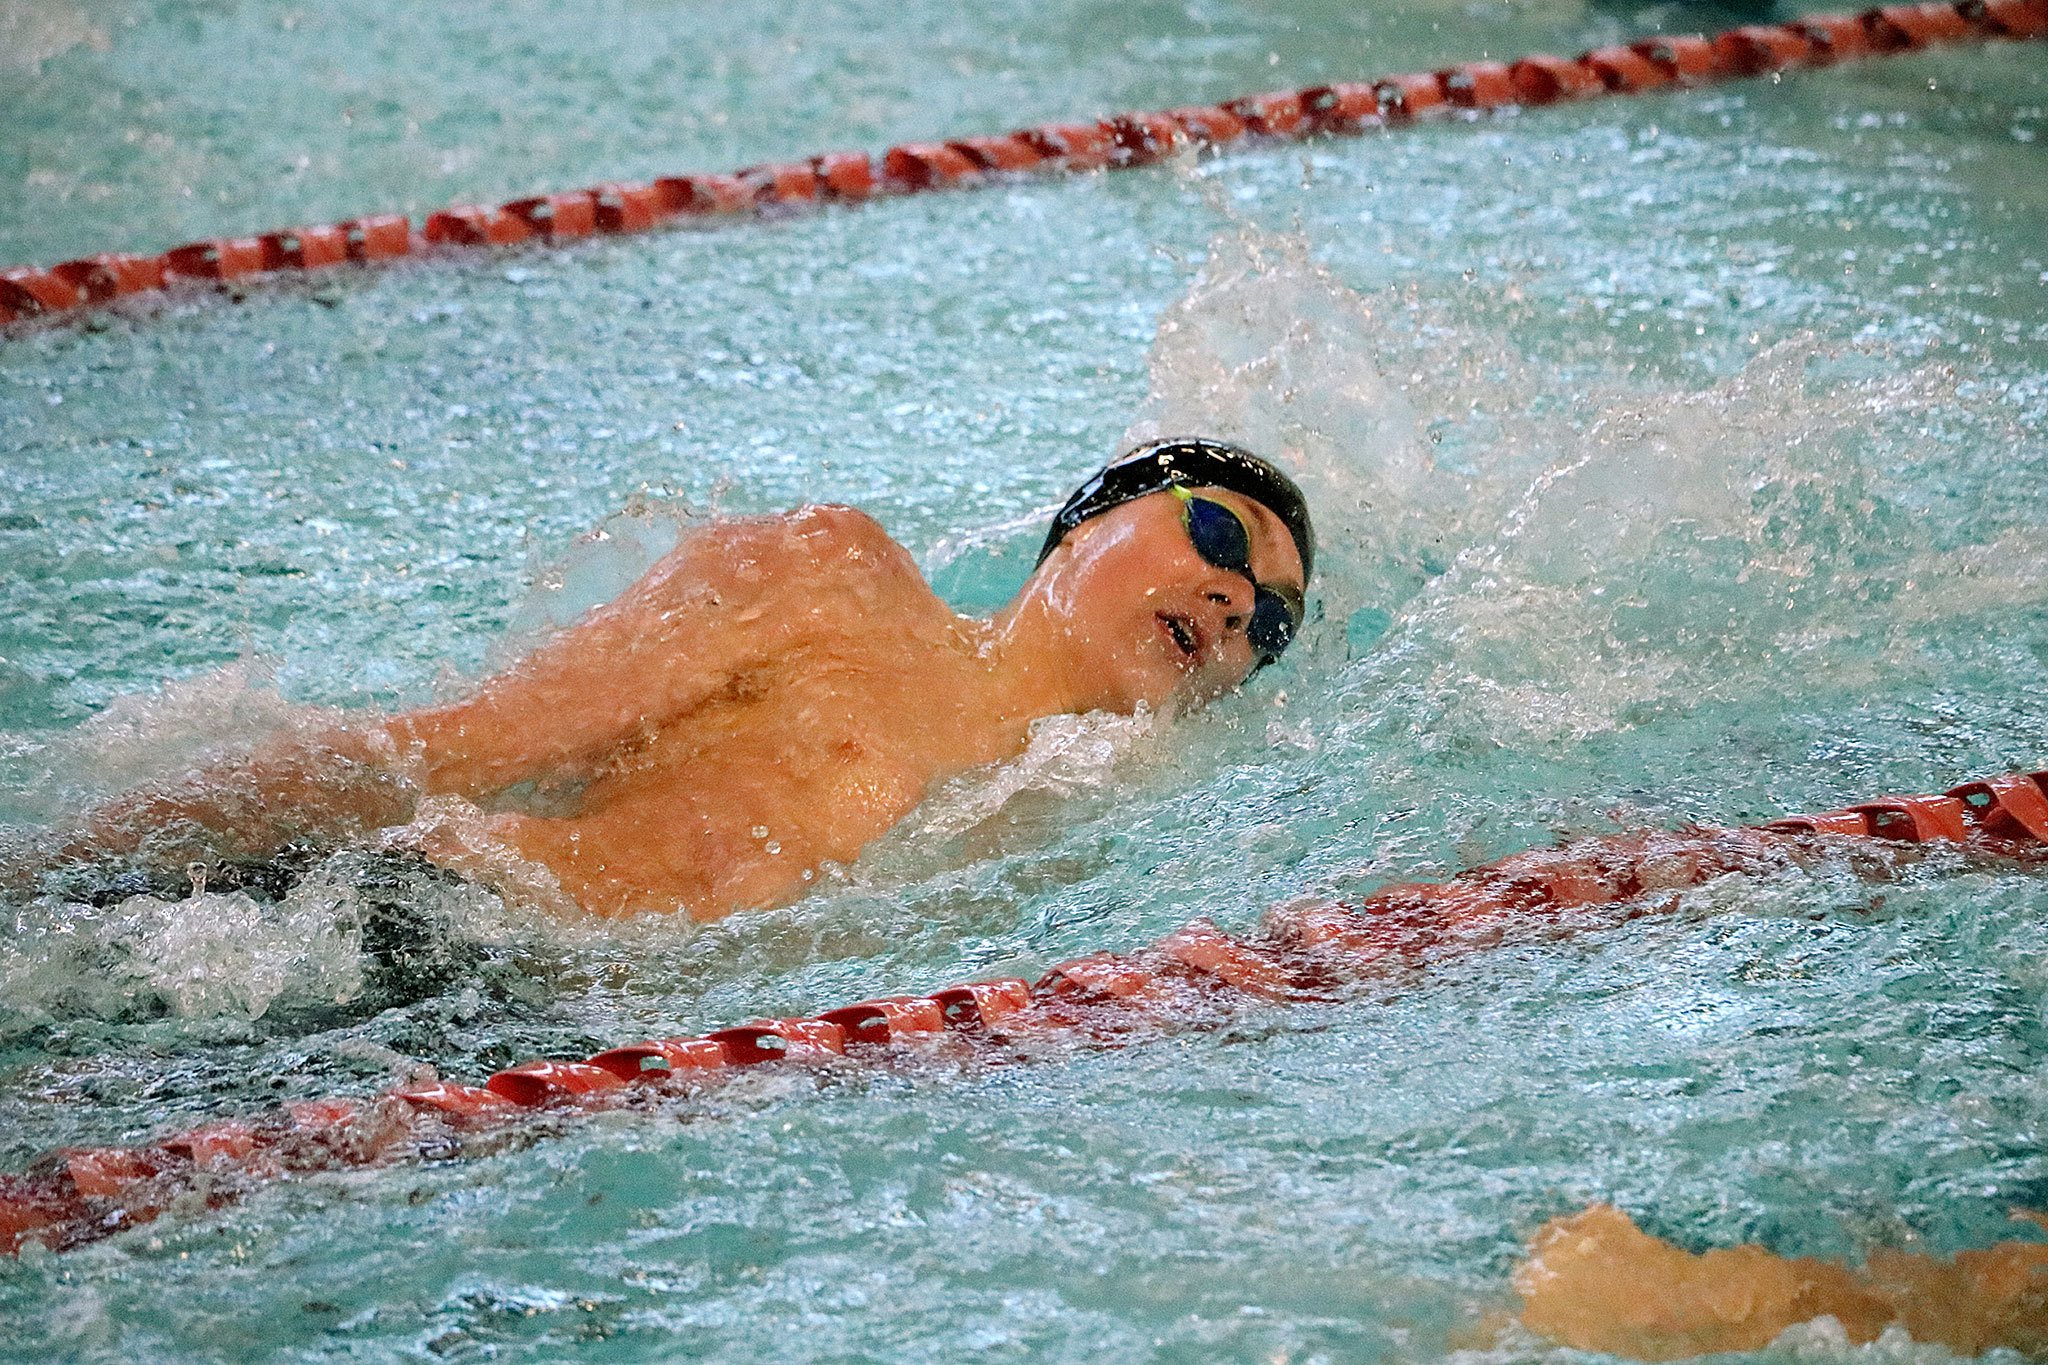 Mercer Island’s Nate Robinson competes in the 100 yard backstroke during the 3A SeaKing district swim championships Saturday at Mary Wayte Pool. Robinson placed eighth overall with a time of 56.35 (Joe Livarchik/staff photo).